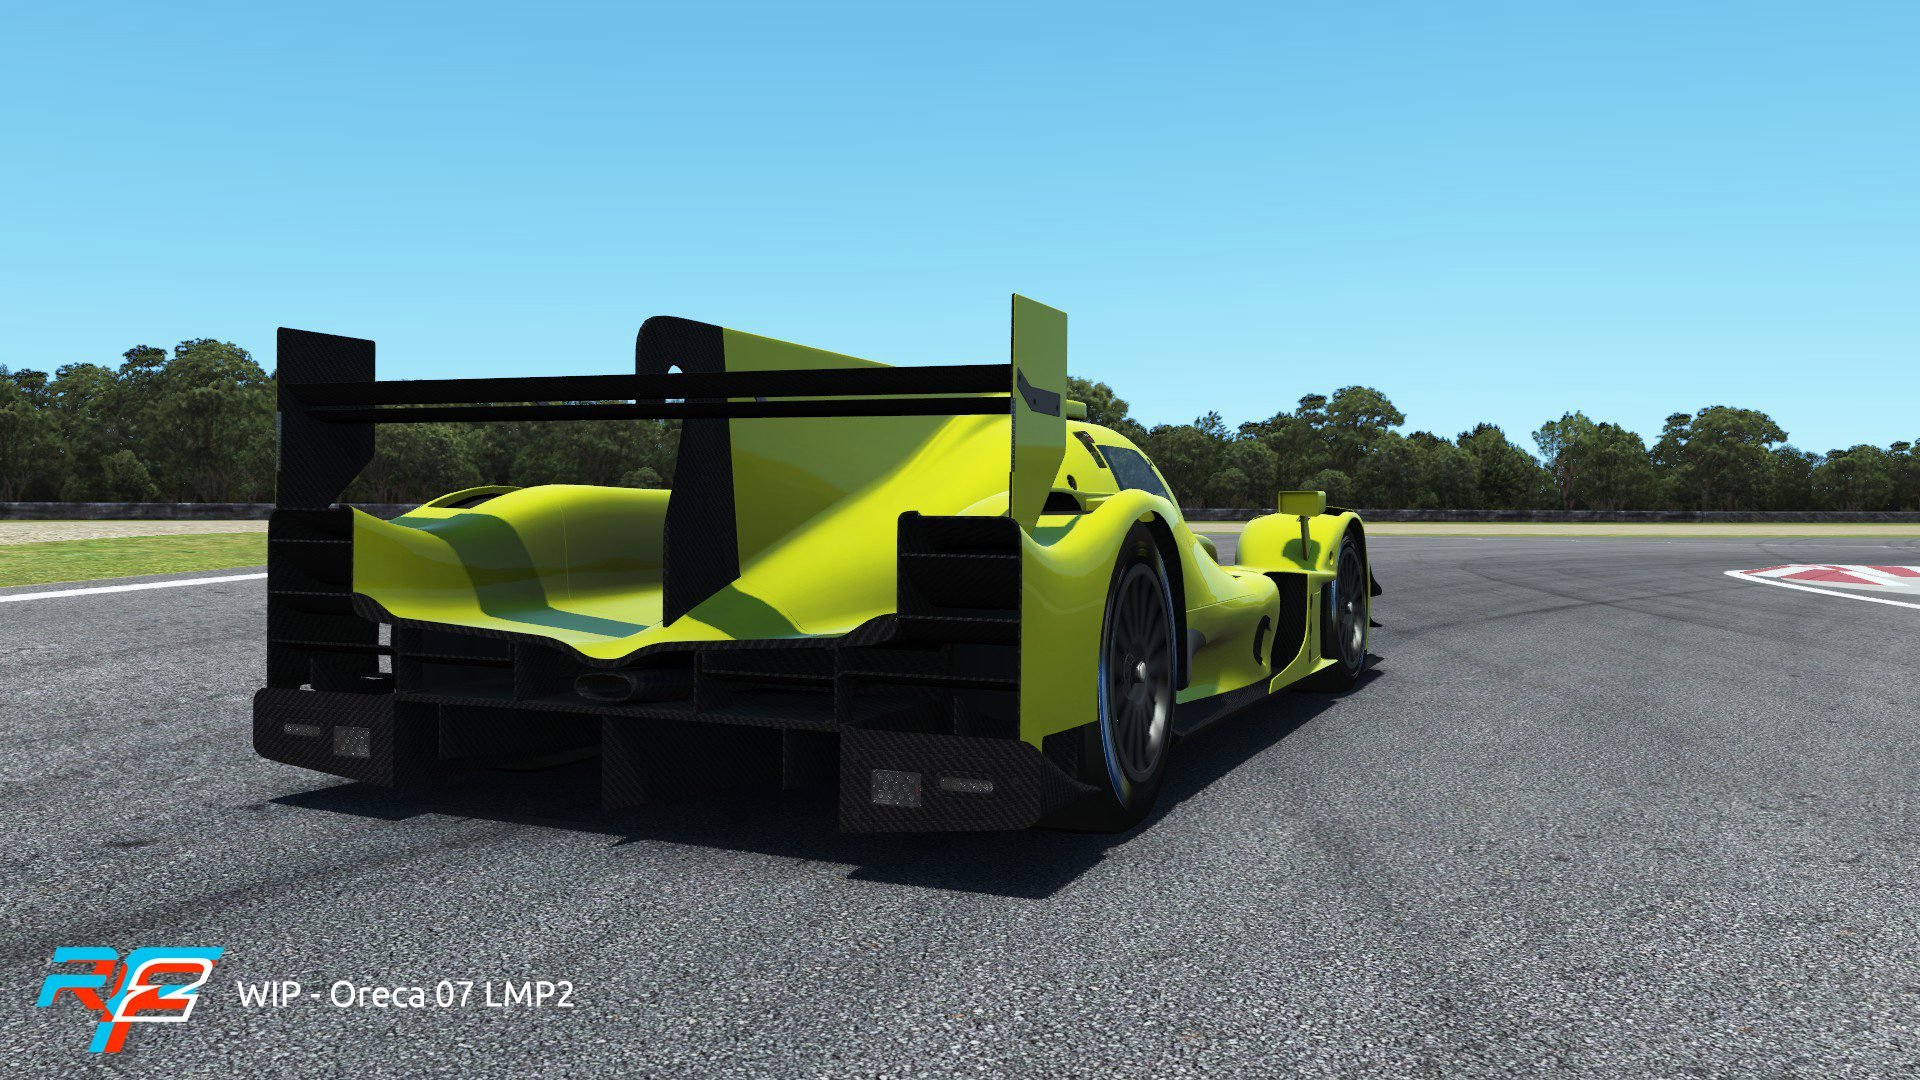 More information about "rFactor 2: Roadmap Update Marzo 2018"